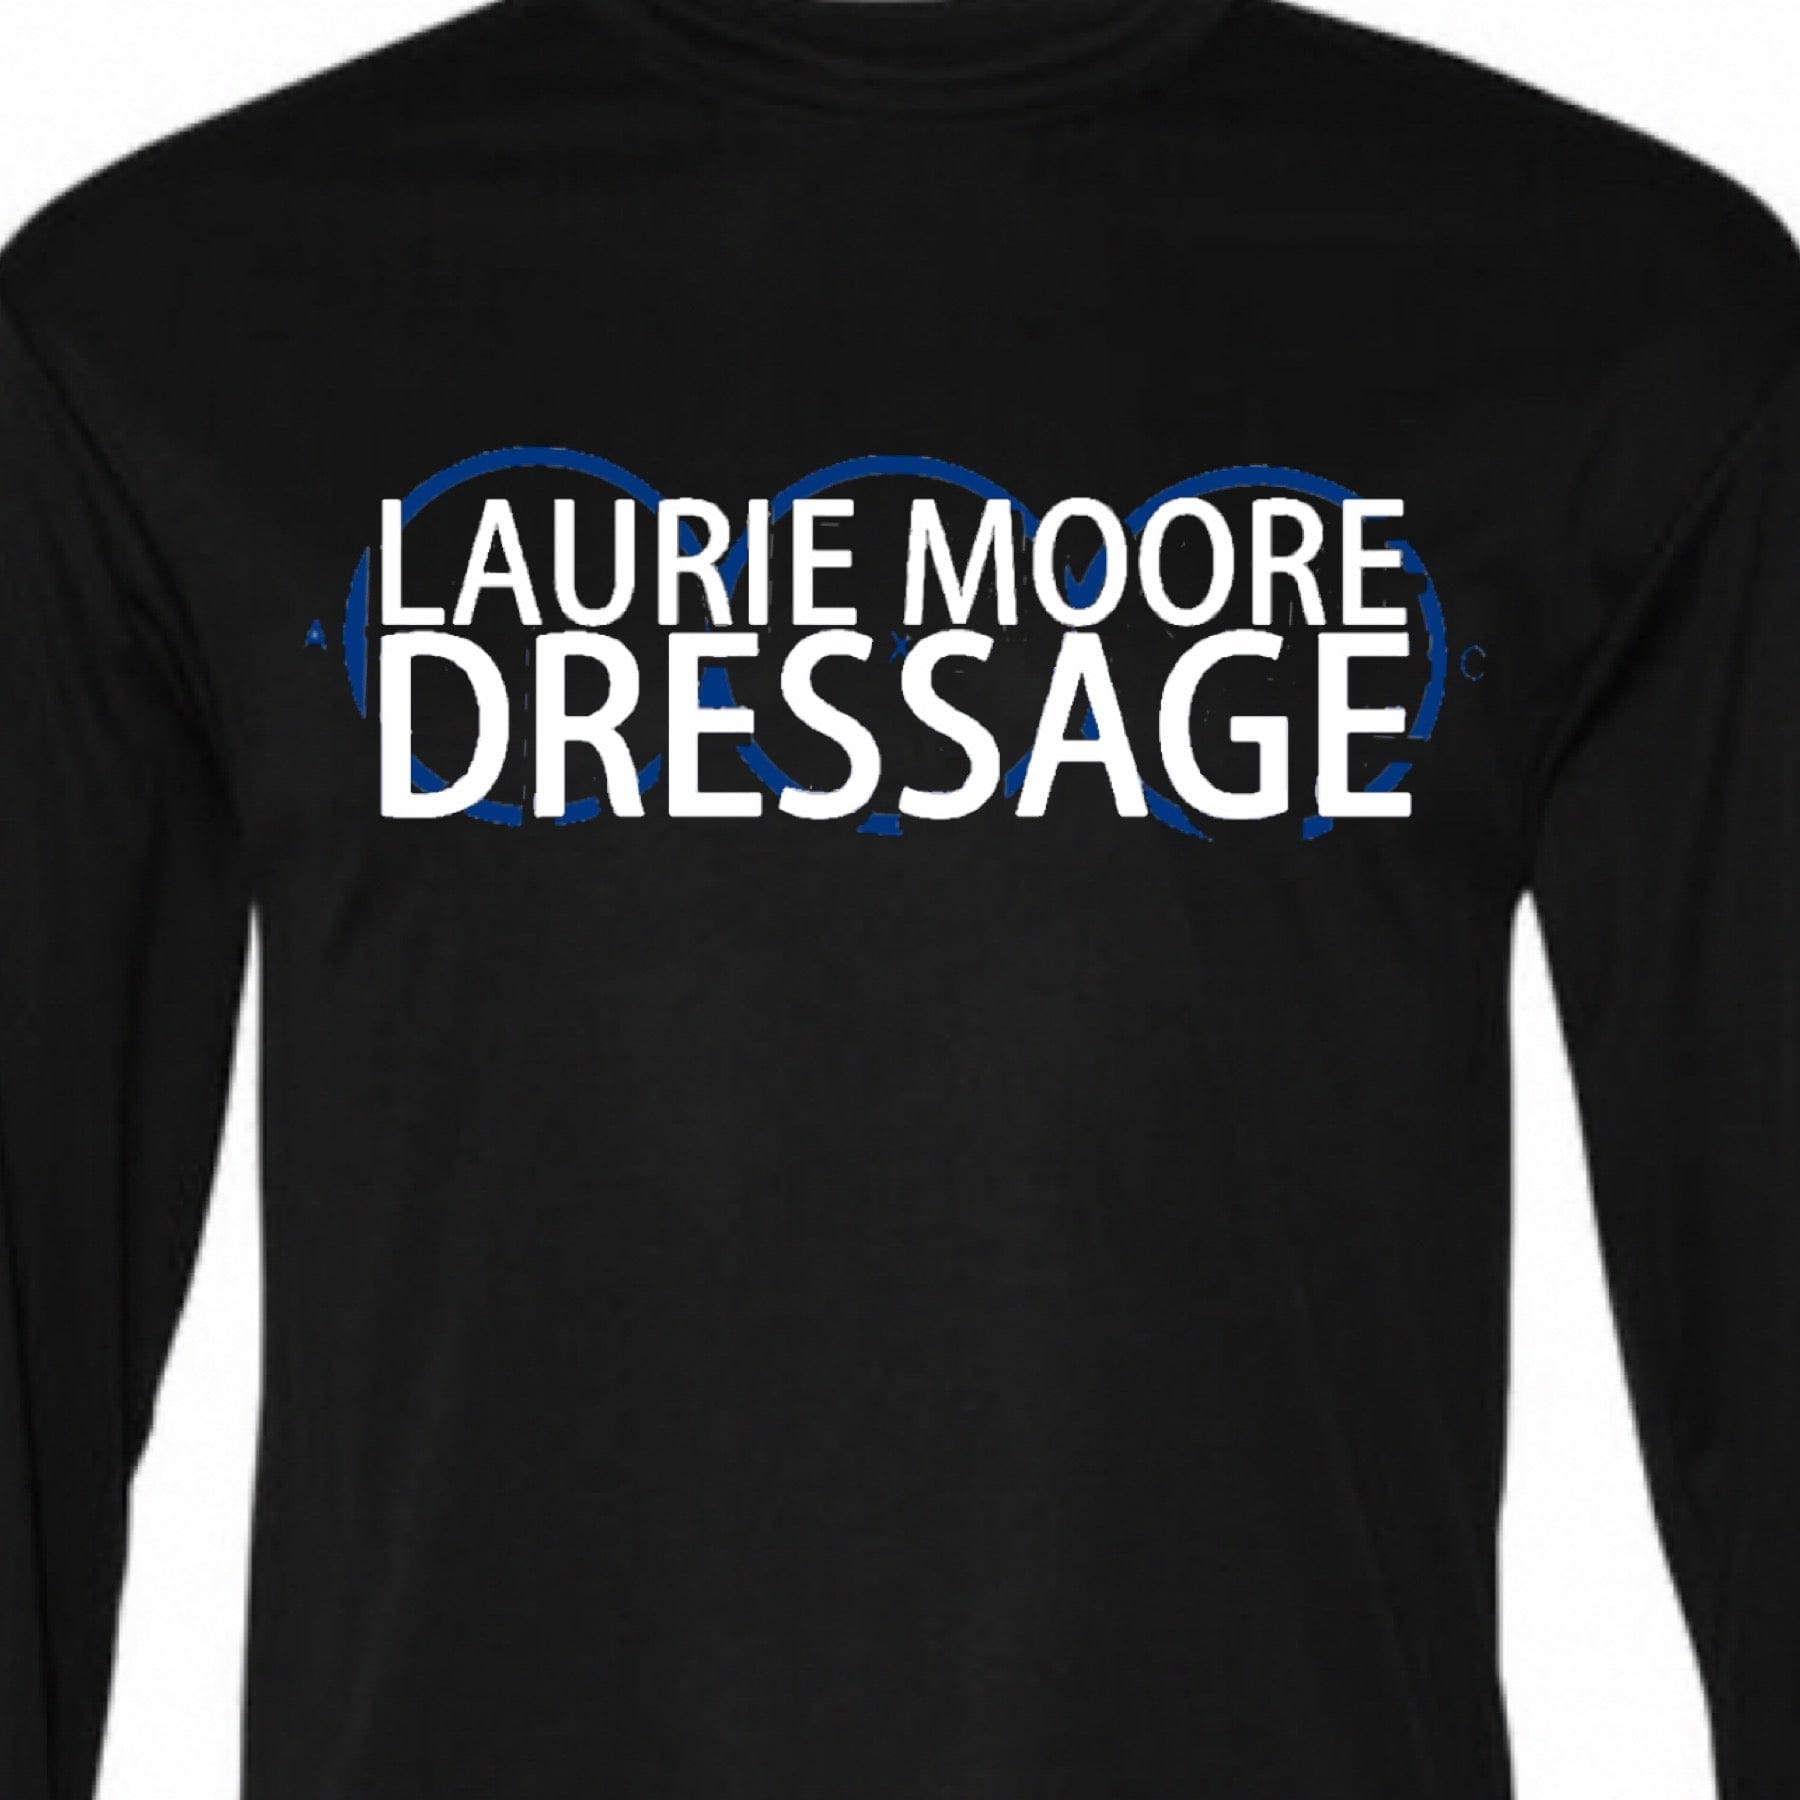 Equestrian Team Apparel Laurie Moore Dressage Sun Shirts equestrian team apparel online tack store mobile tack store custom farm apparel custom show stable clothing equestrian lifestyle horse show clothing riding clothes horses equestrian tack store